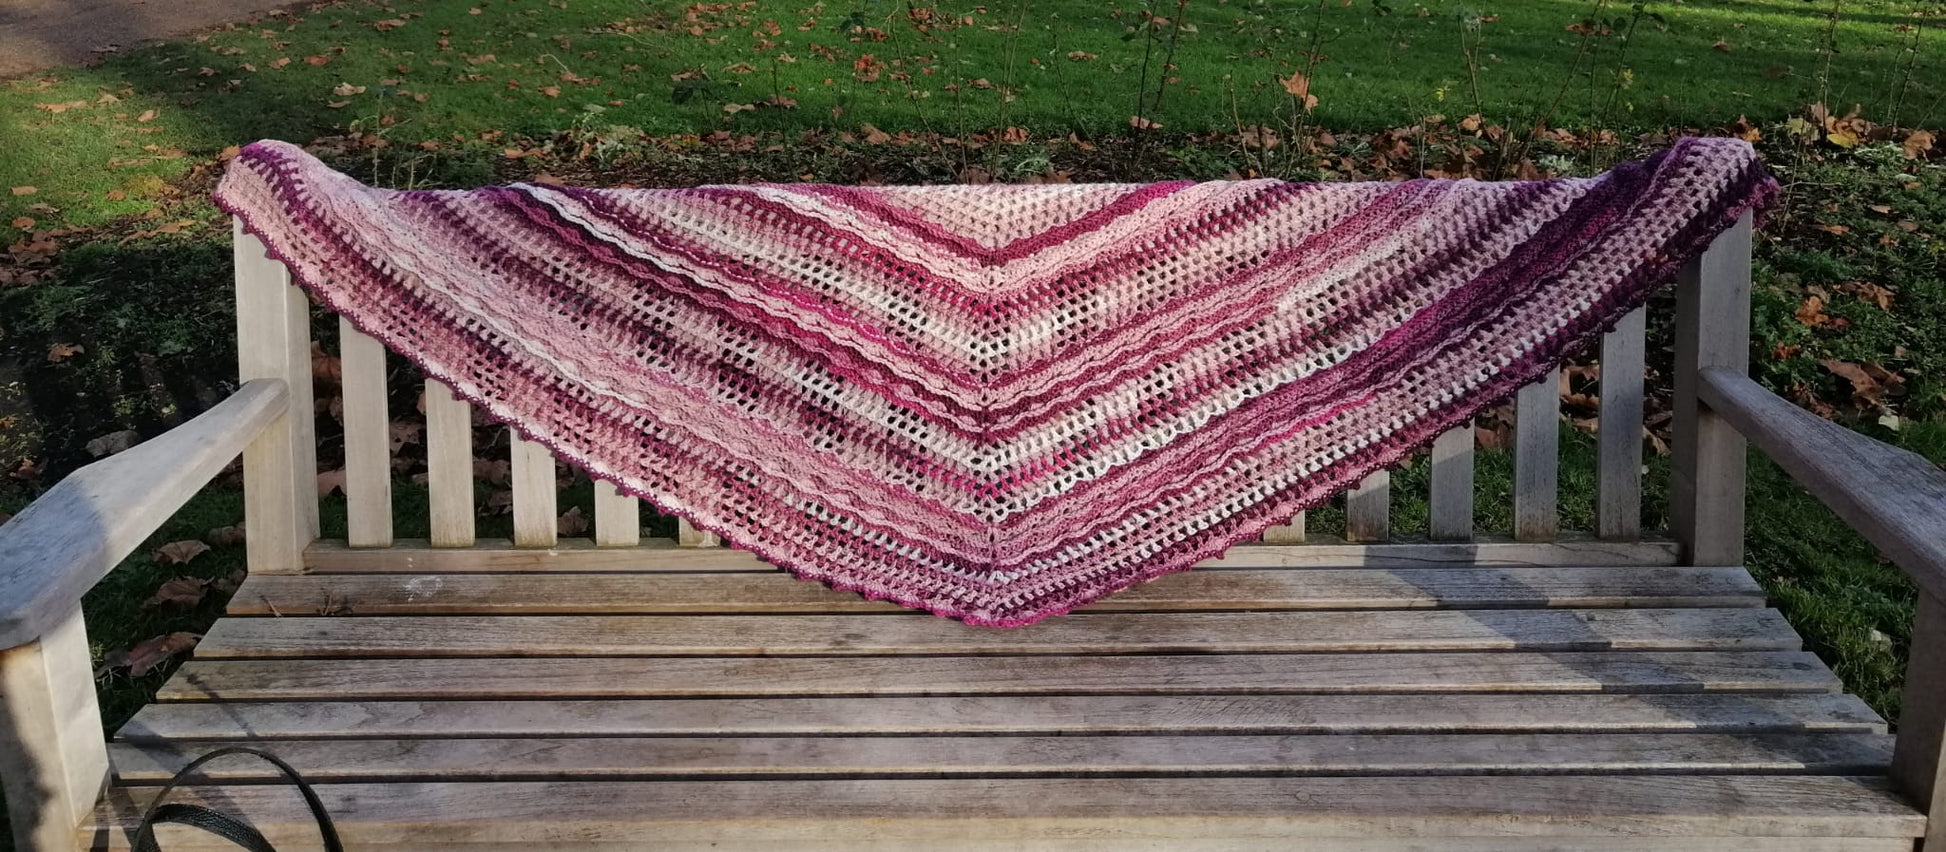 Showing it's full length and width, you can also see the pattern of whites, pinks and mauves used in this design of 'Antique Rose Crochet Shawl'.